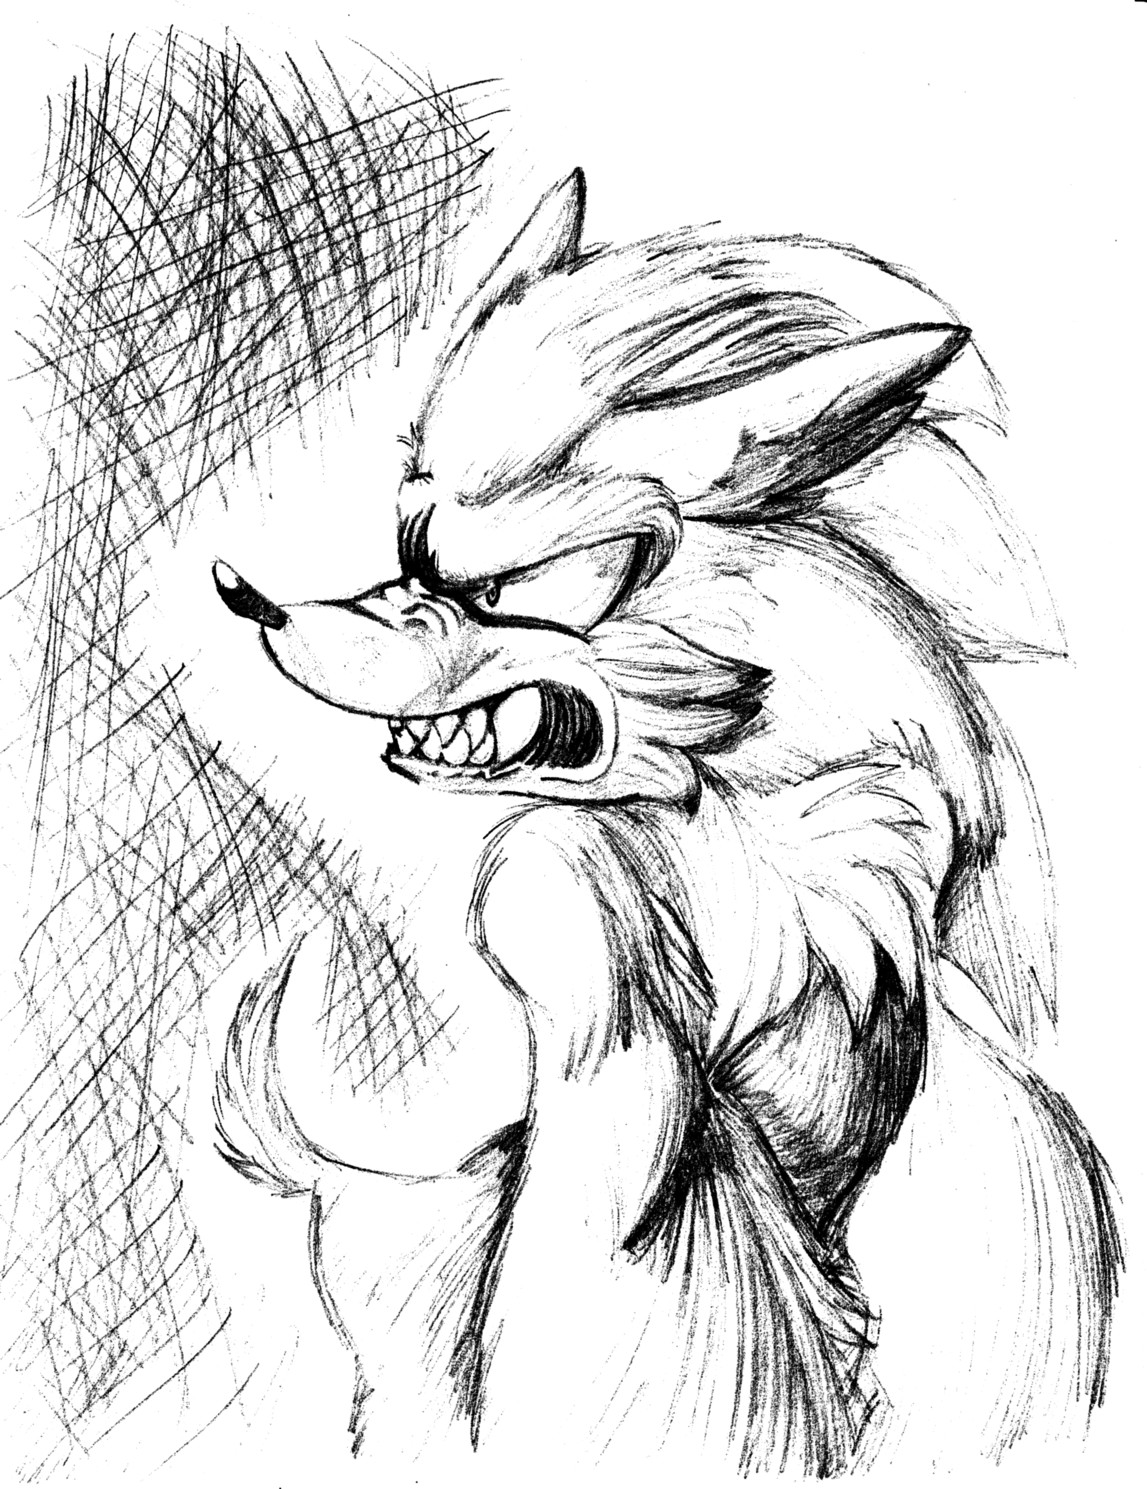 OH GOD IT'S A WEREHOG by TheGameArtCritic